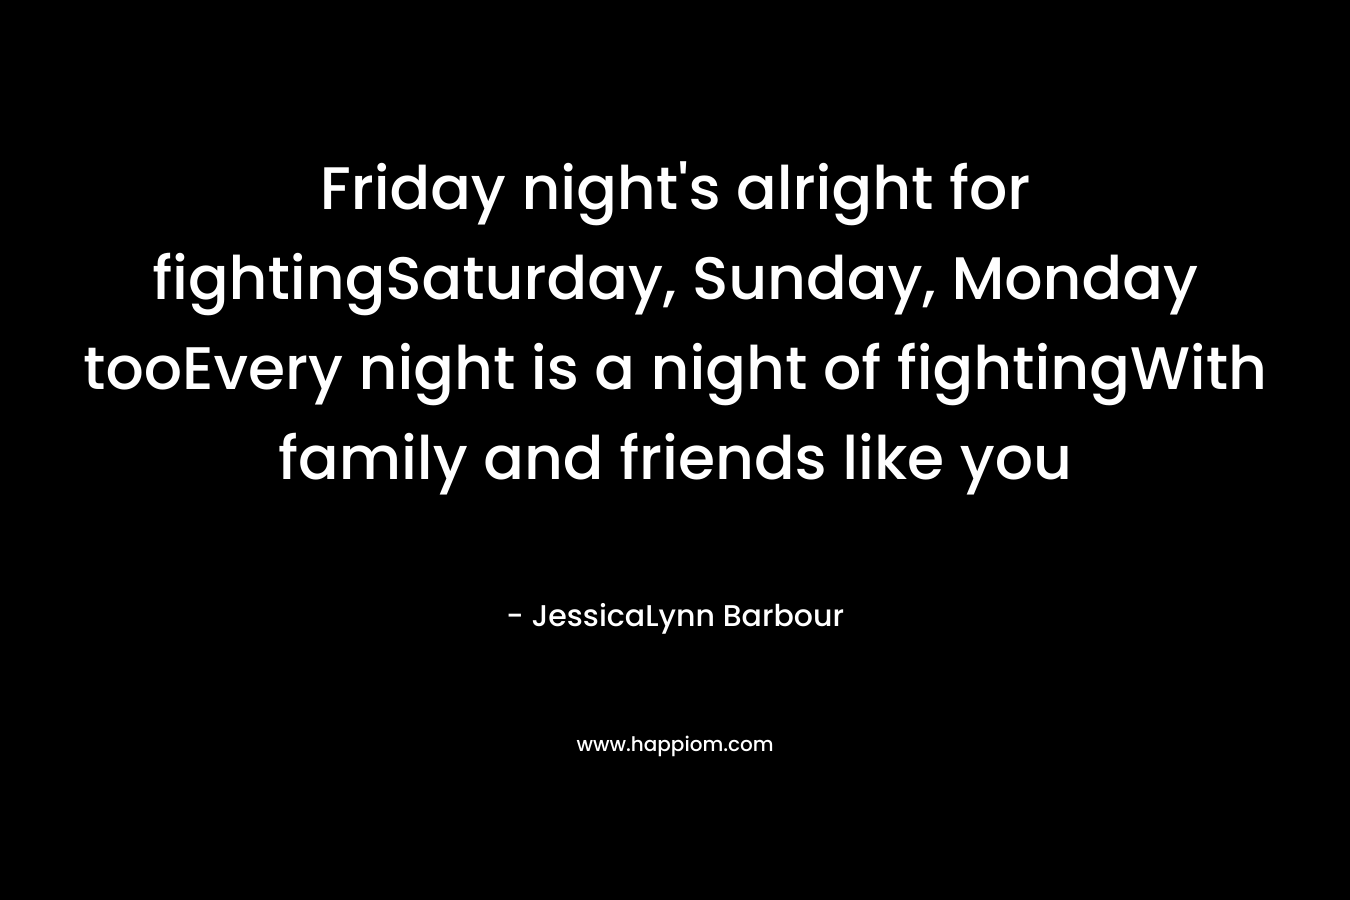 Friday night's alright for fightingSaturday, Sunday, Monday tooEvery night is a night of fightingWith family and friends like you